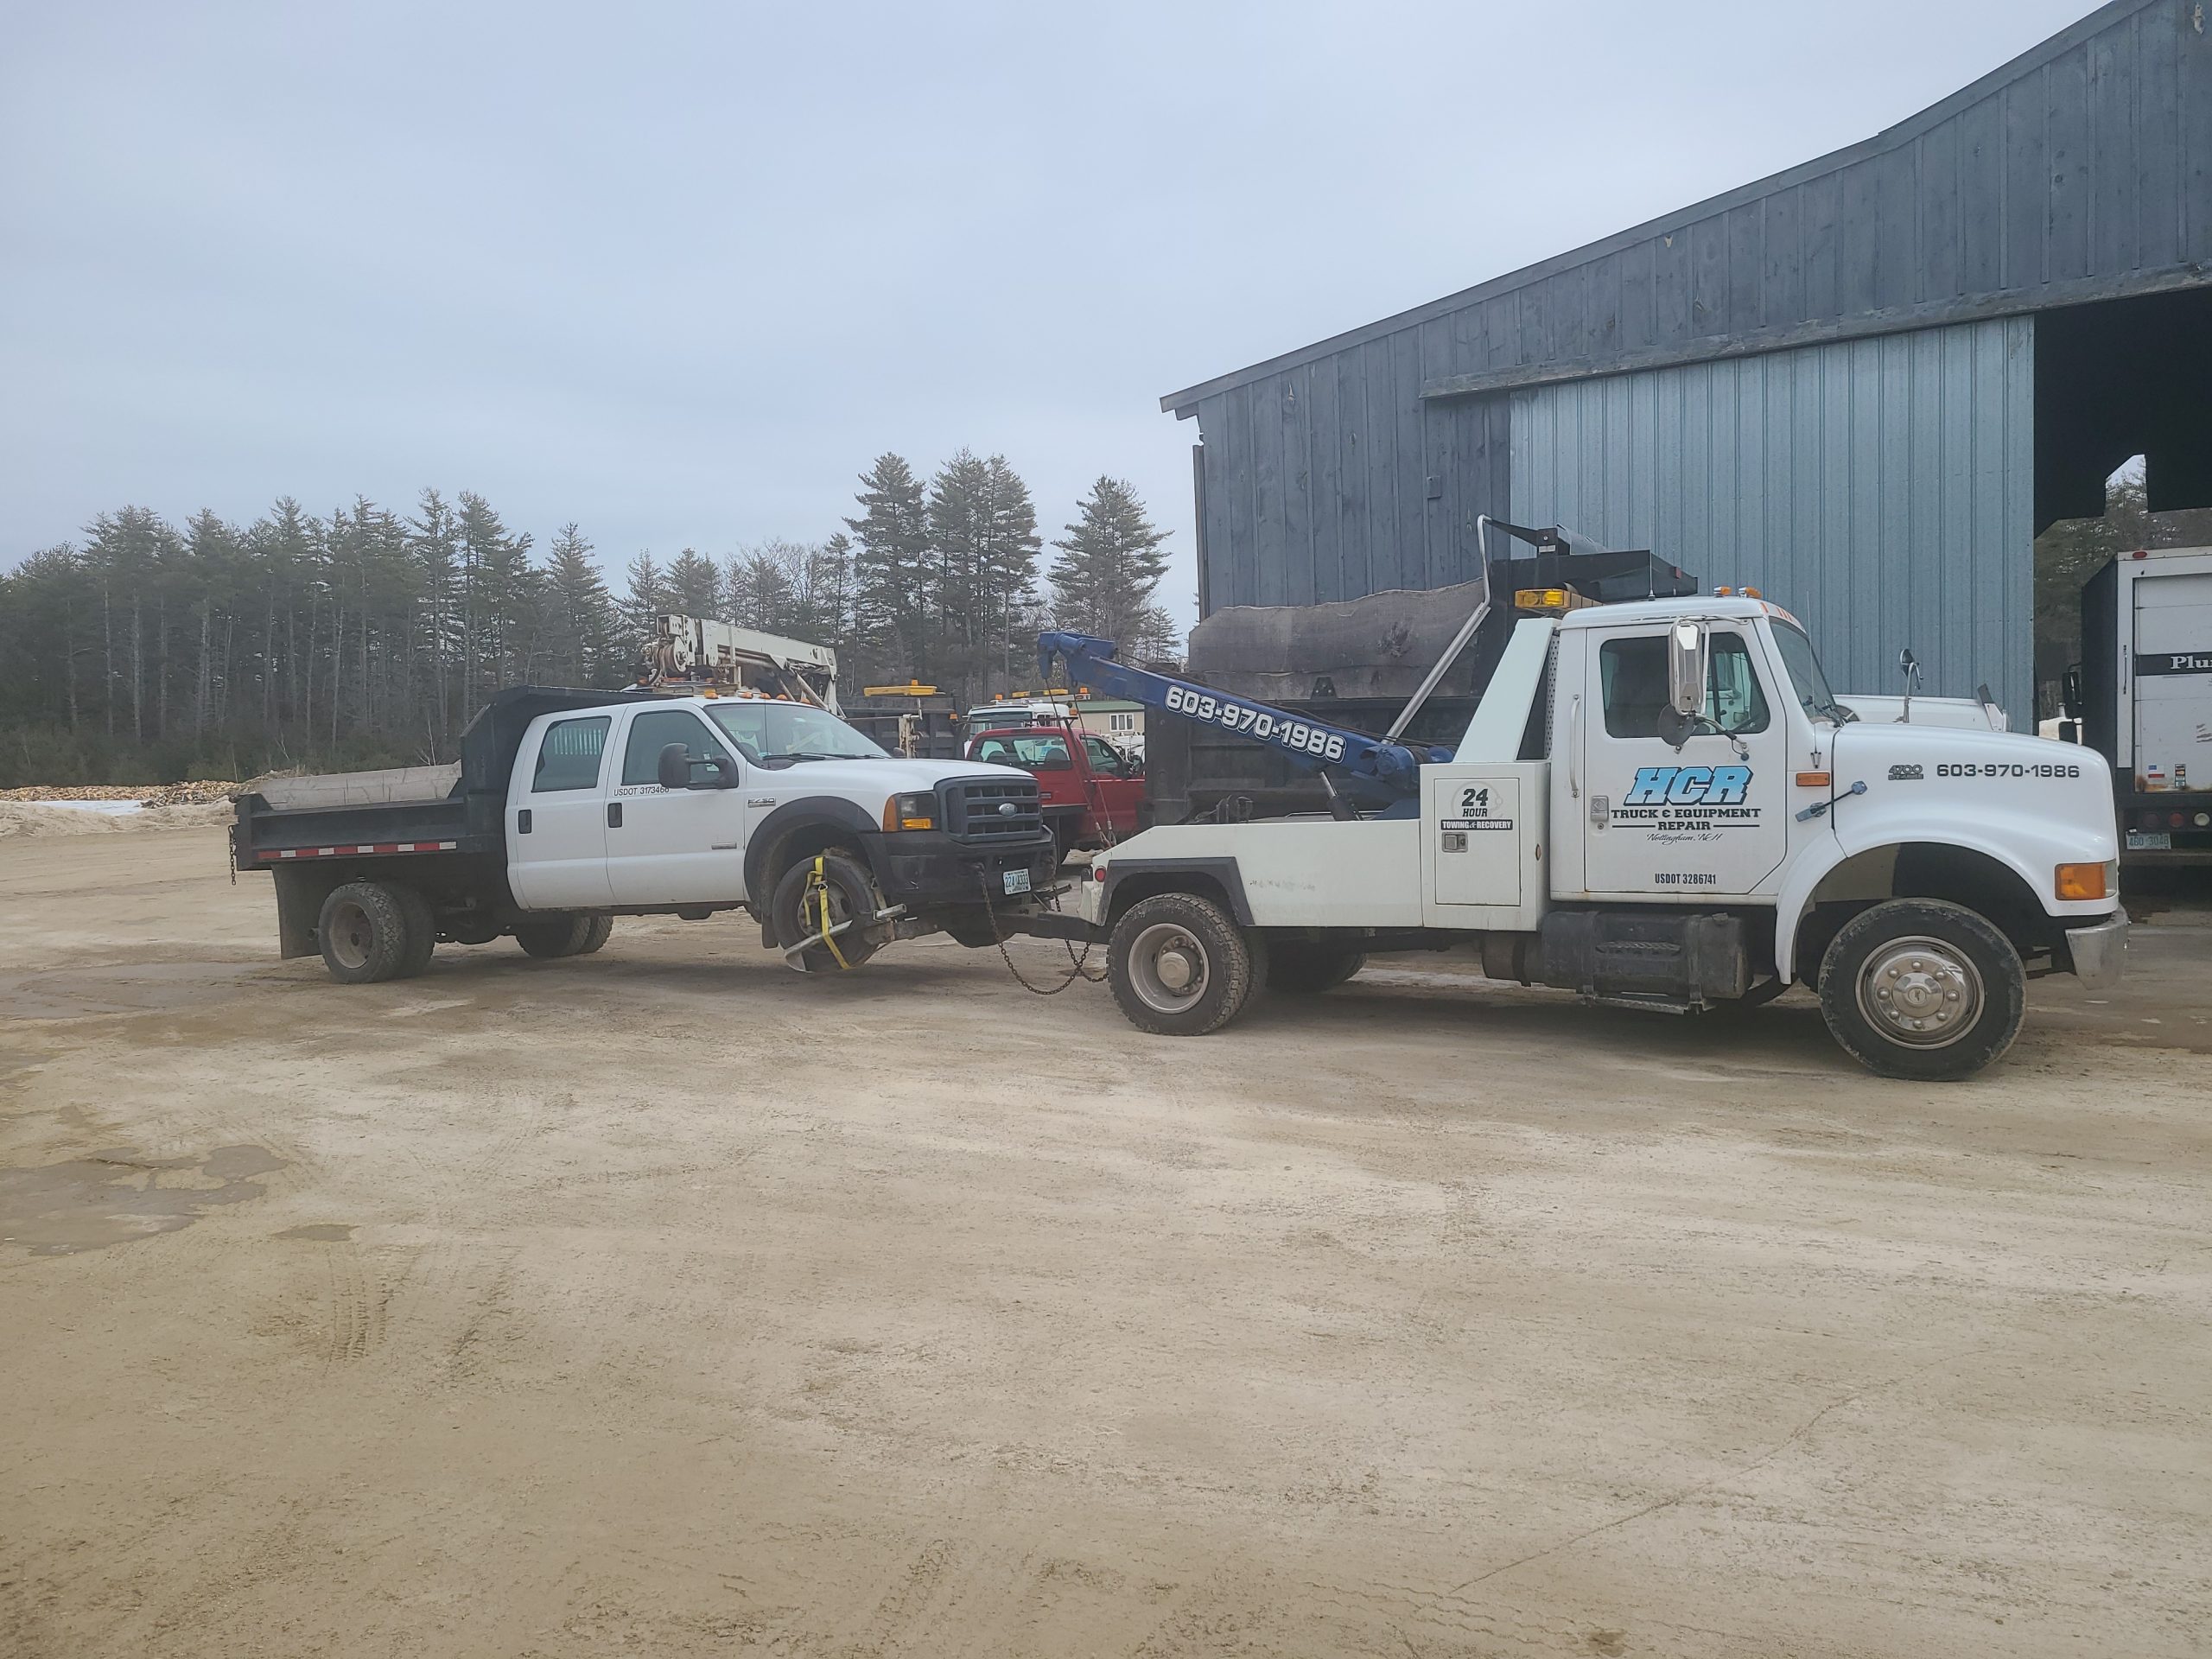 HCR Truck and Repair towing a truck